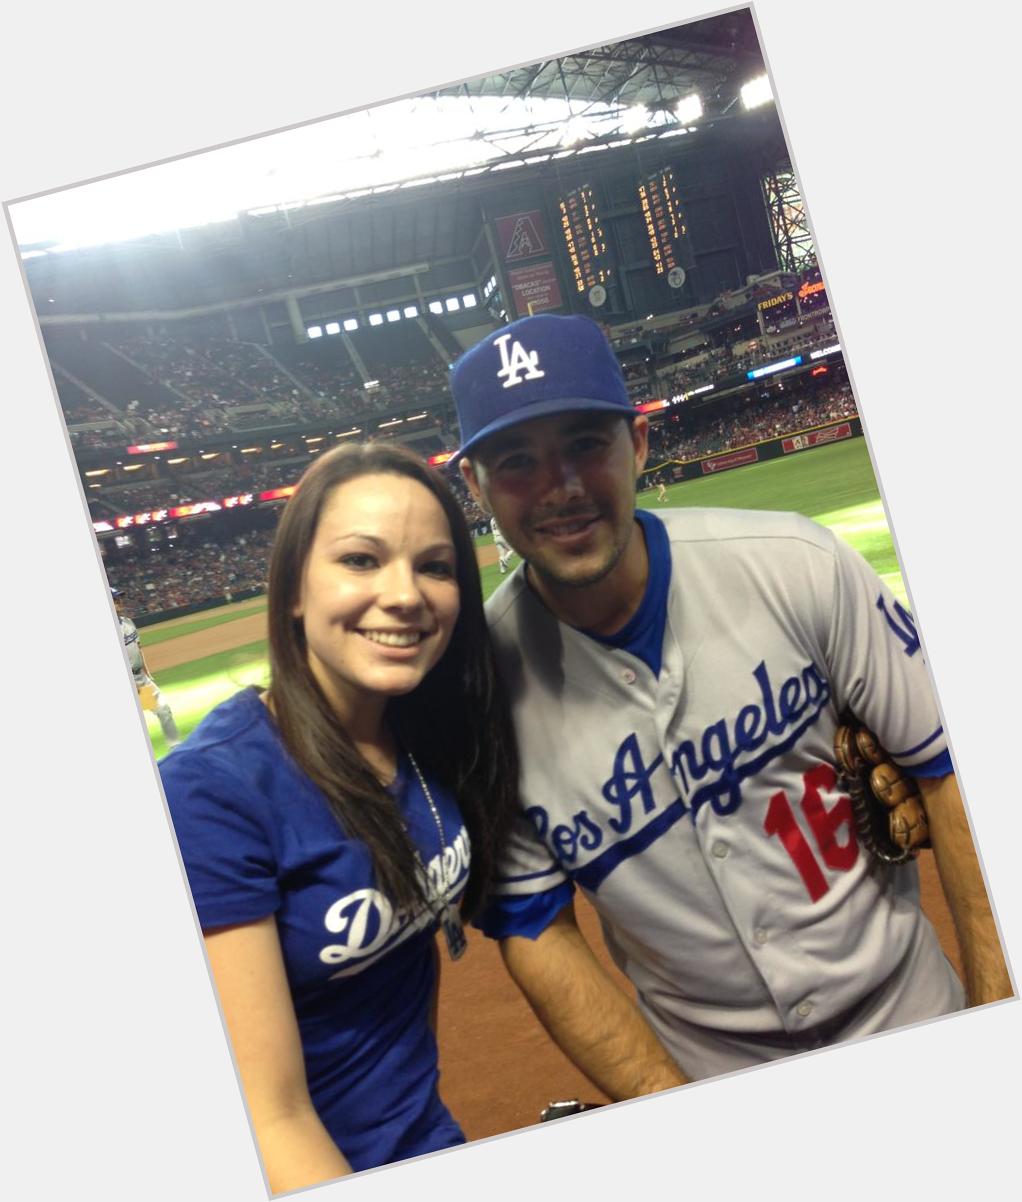 HAPPY LATE BIRTHDAY TO ANDRE ETHIER! Can\t wait to watch you play tonight. This az girl bleeds blue 